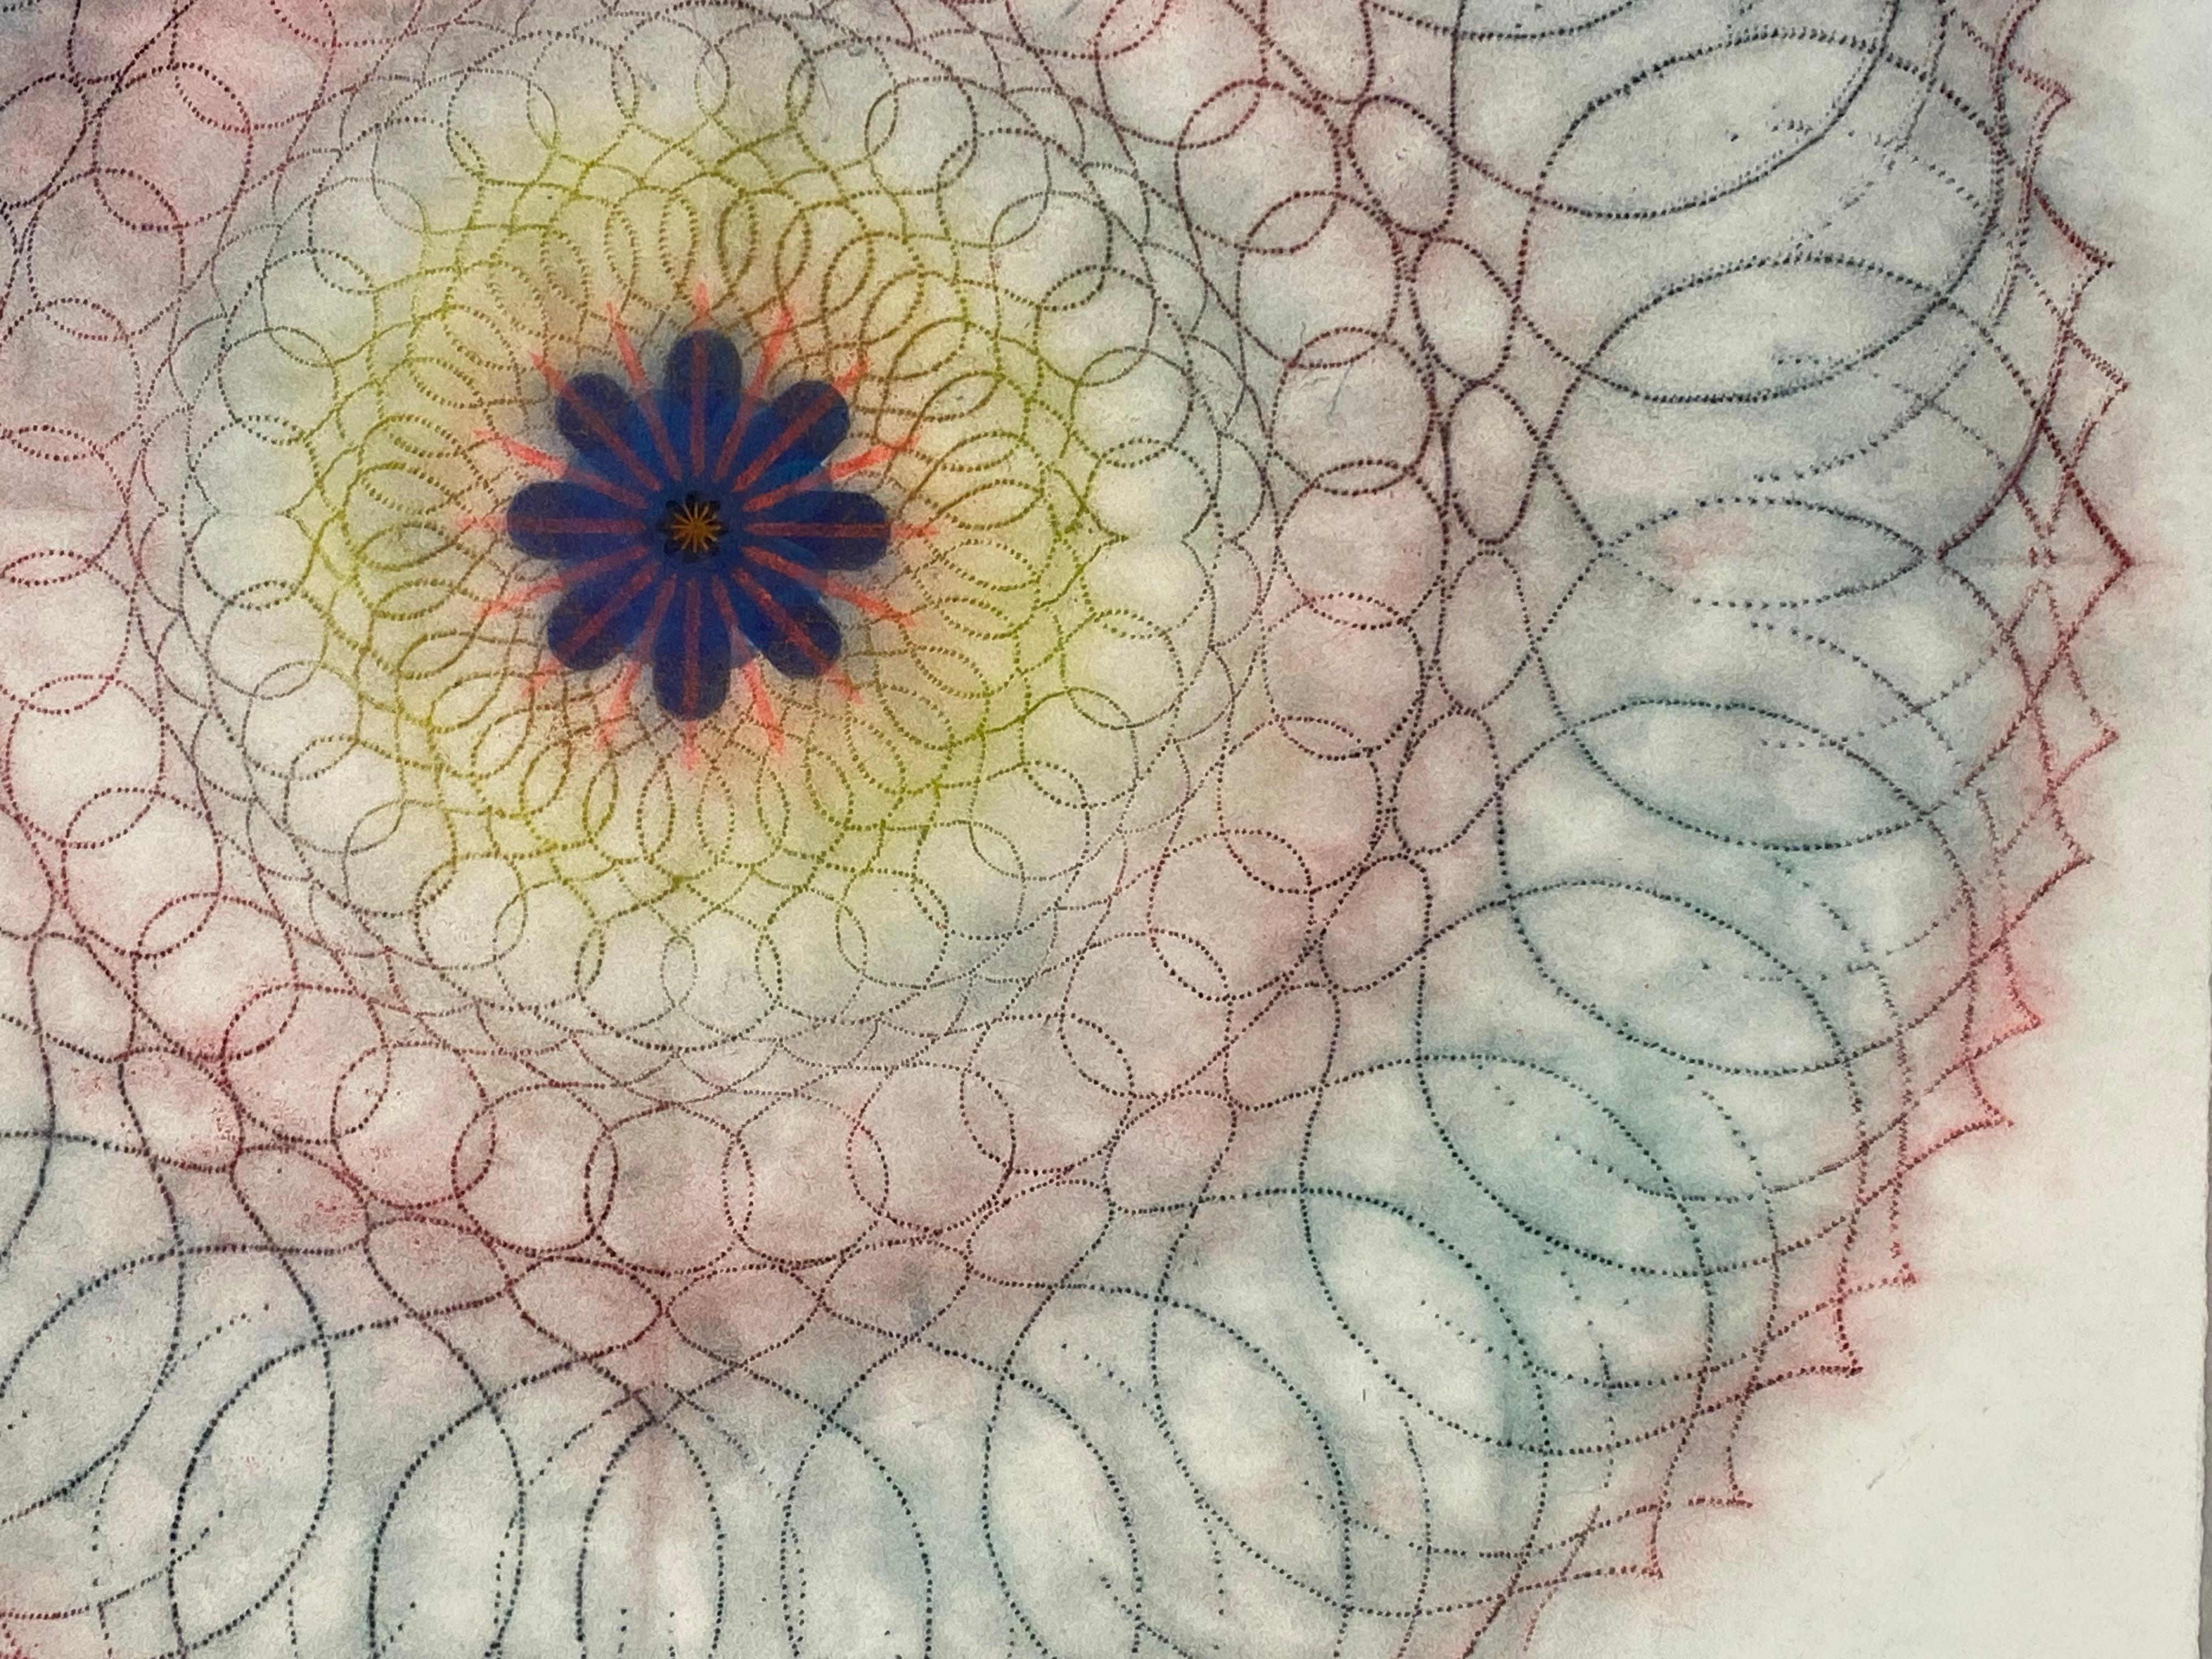 This multicolored drawing has a beautiful, soft mottled texture created with Judge's unique powered pigment technique. Primavera Pop 30 is a predominately dark burgundy red and dark hunter green mandala shape with navy blue and bright orange and